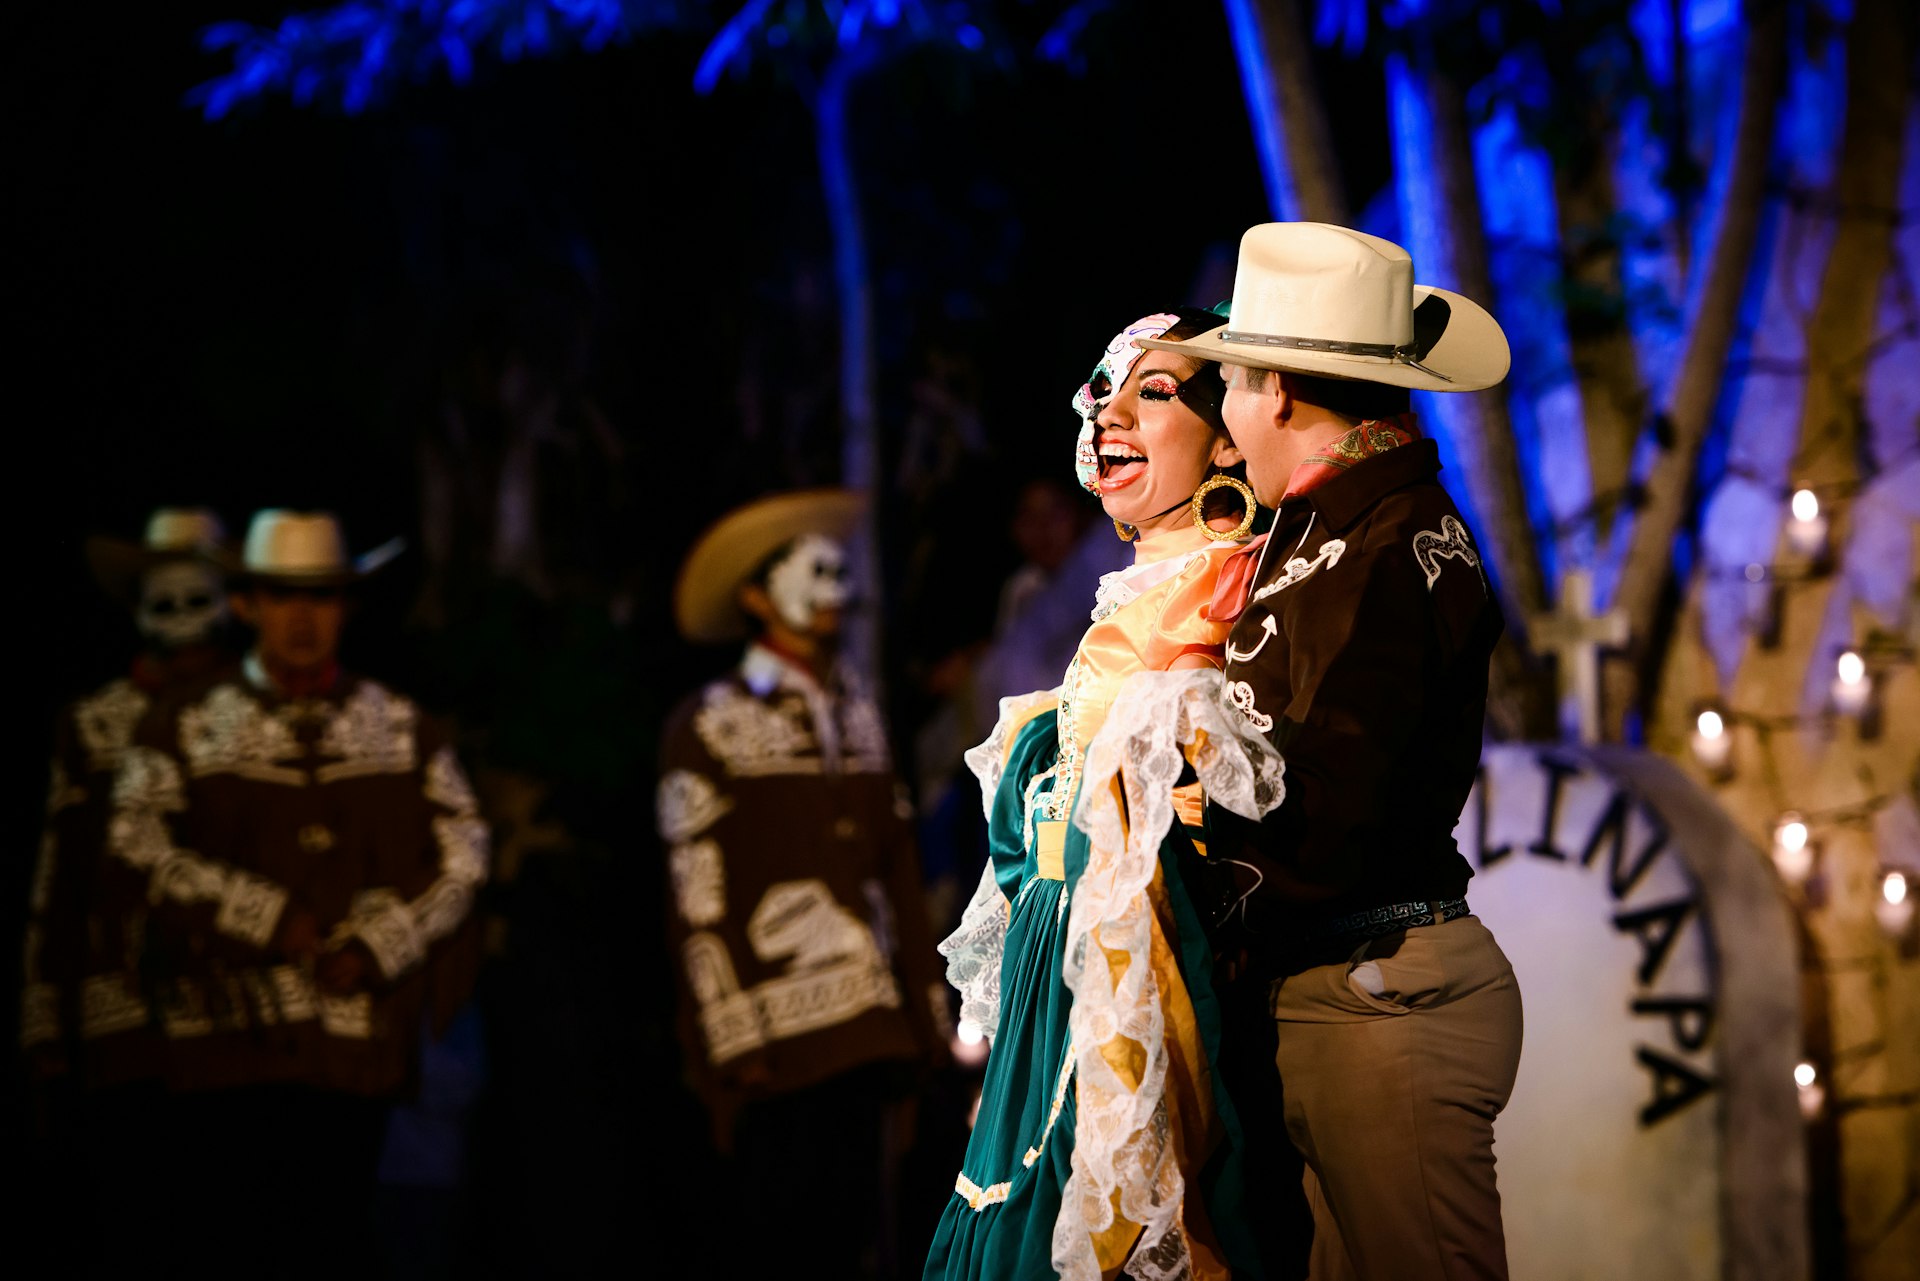 Dancers in costume embrace at a of Day of the Dead (Día de Muertos) celebration at Xcaret, Playa del Carmen, Quintana Roo, Mexico